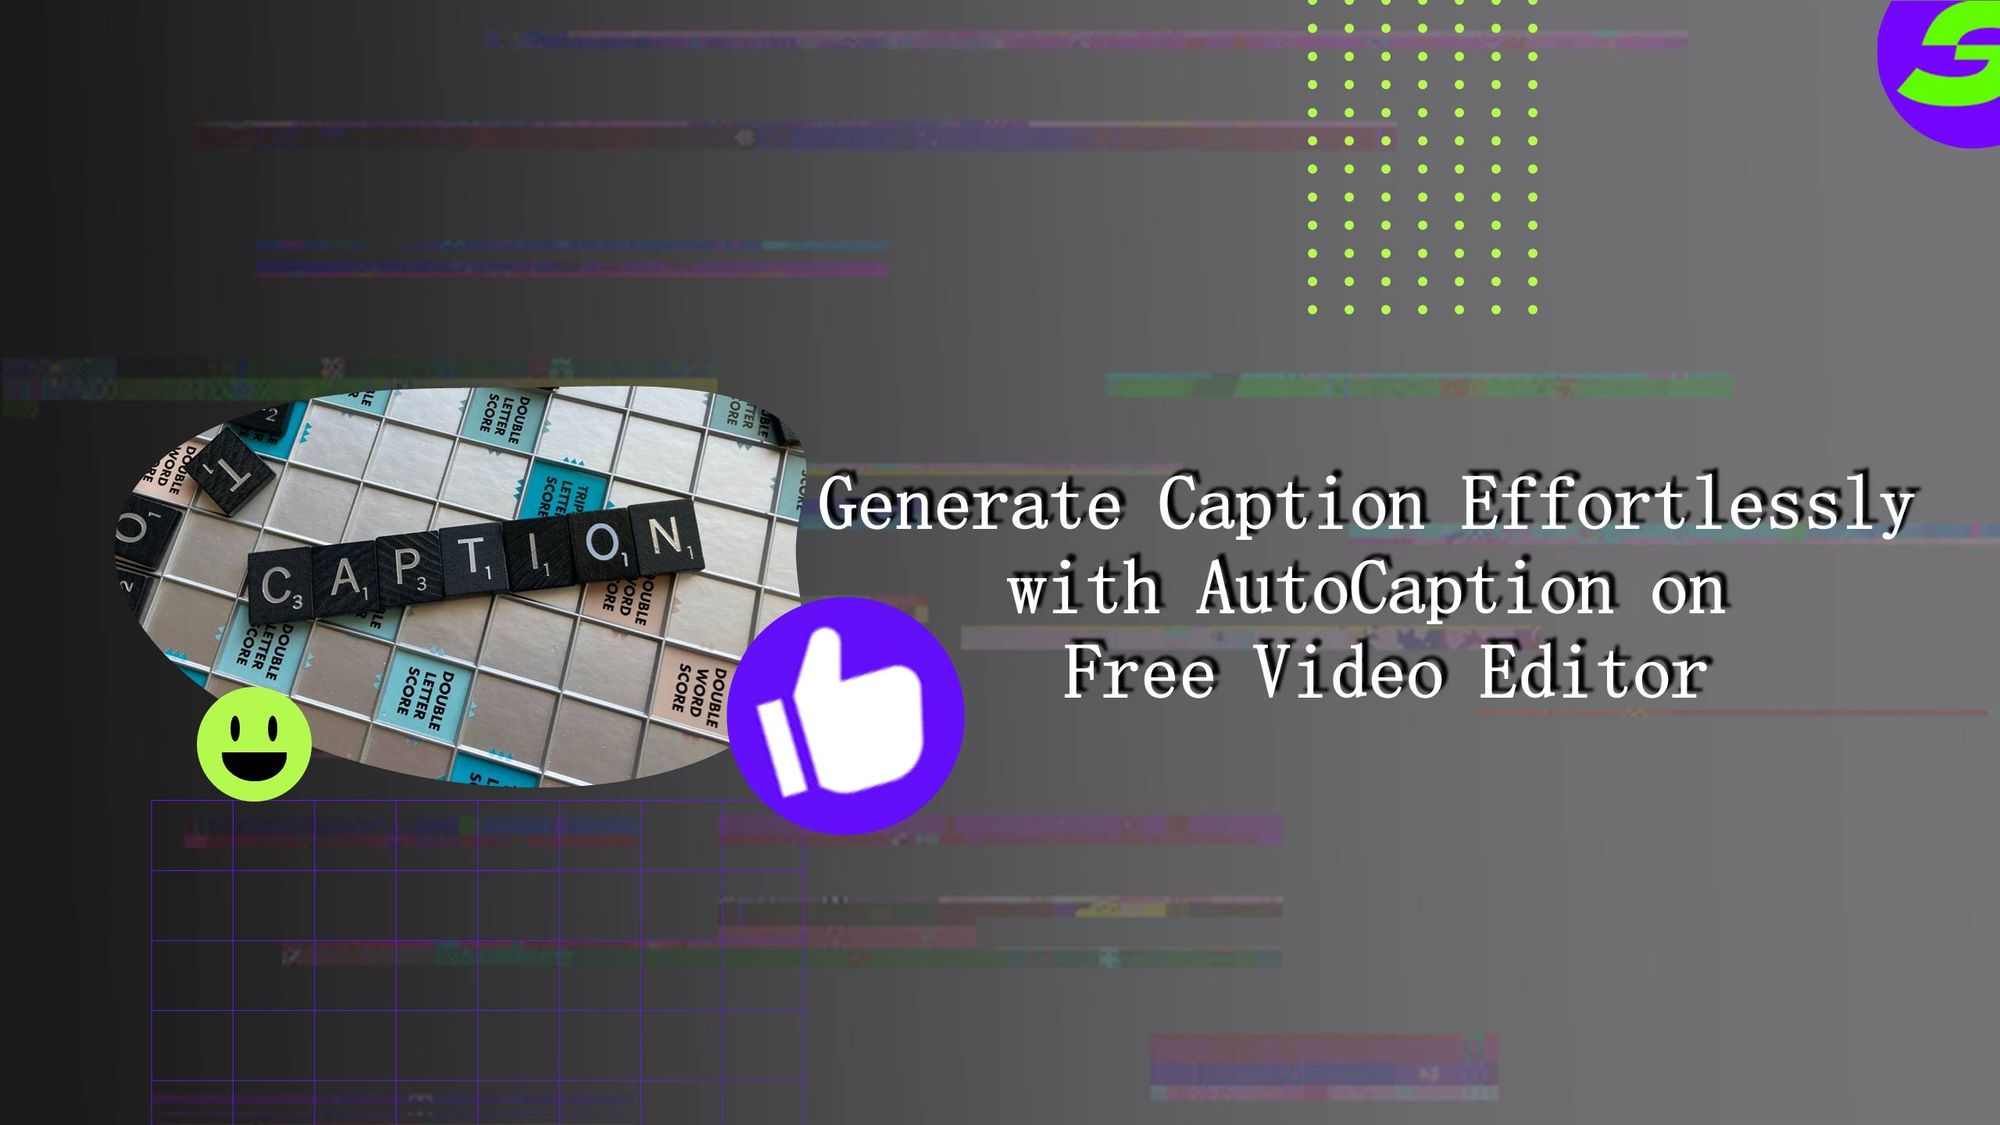 Generate Captionquick and easy with ShotCut Free Video Editor